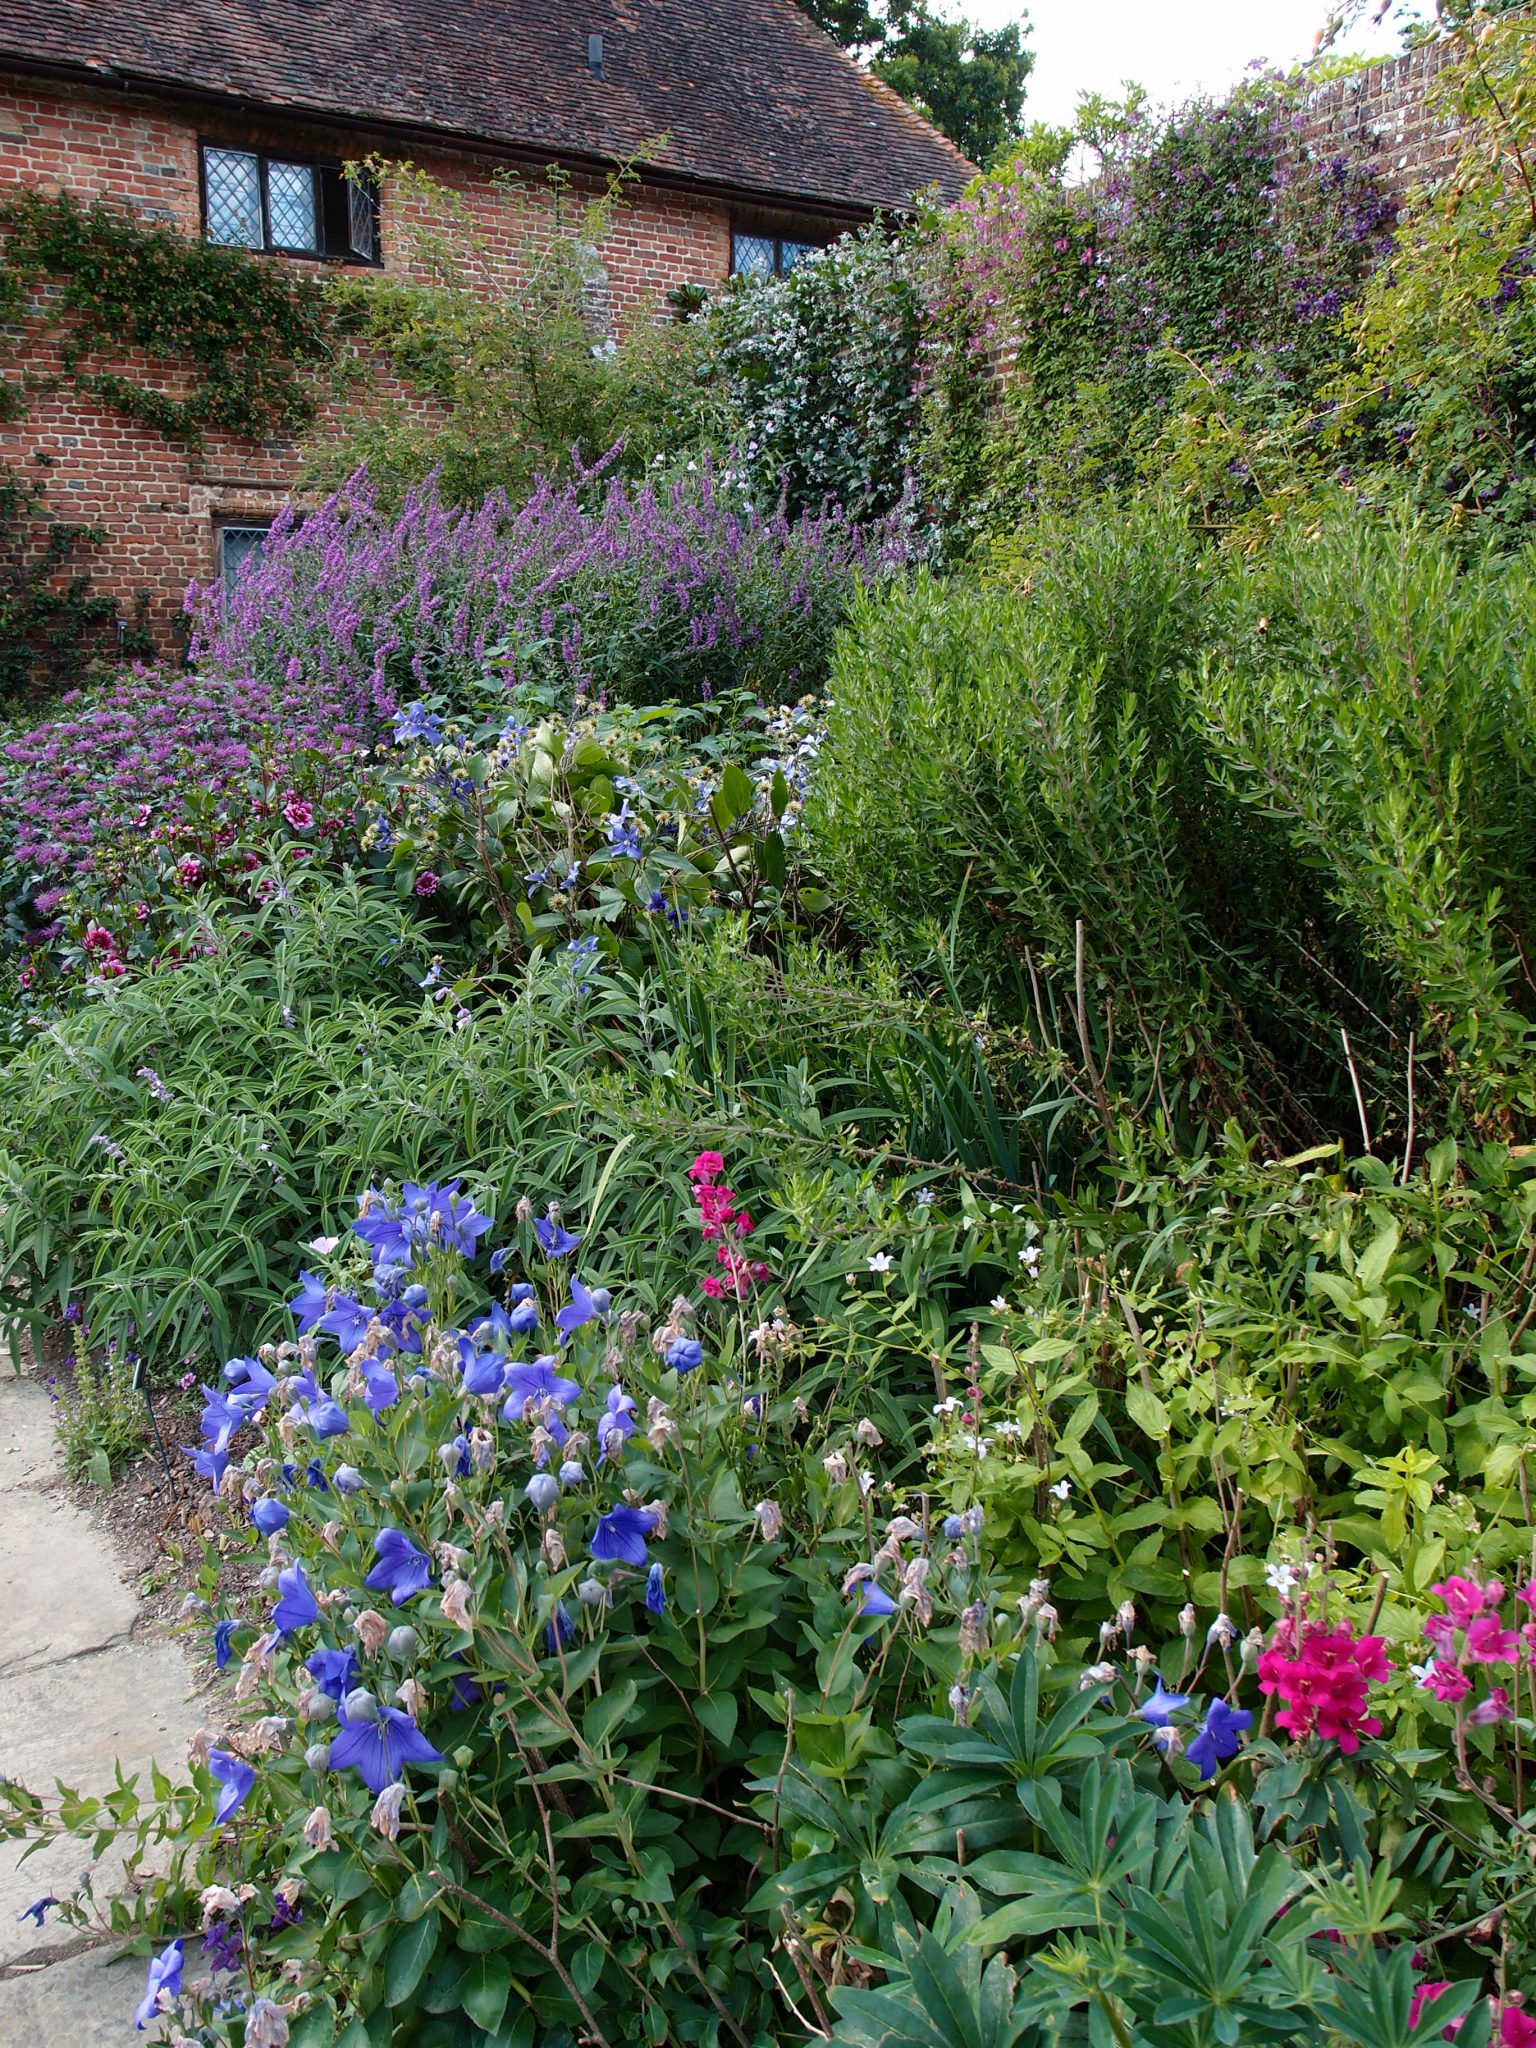 Vita planted the Purple Border with a clever mix of pinks, blues, lilacs and...yes, purples.